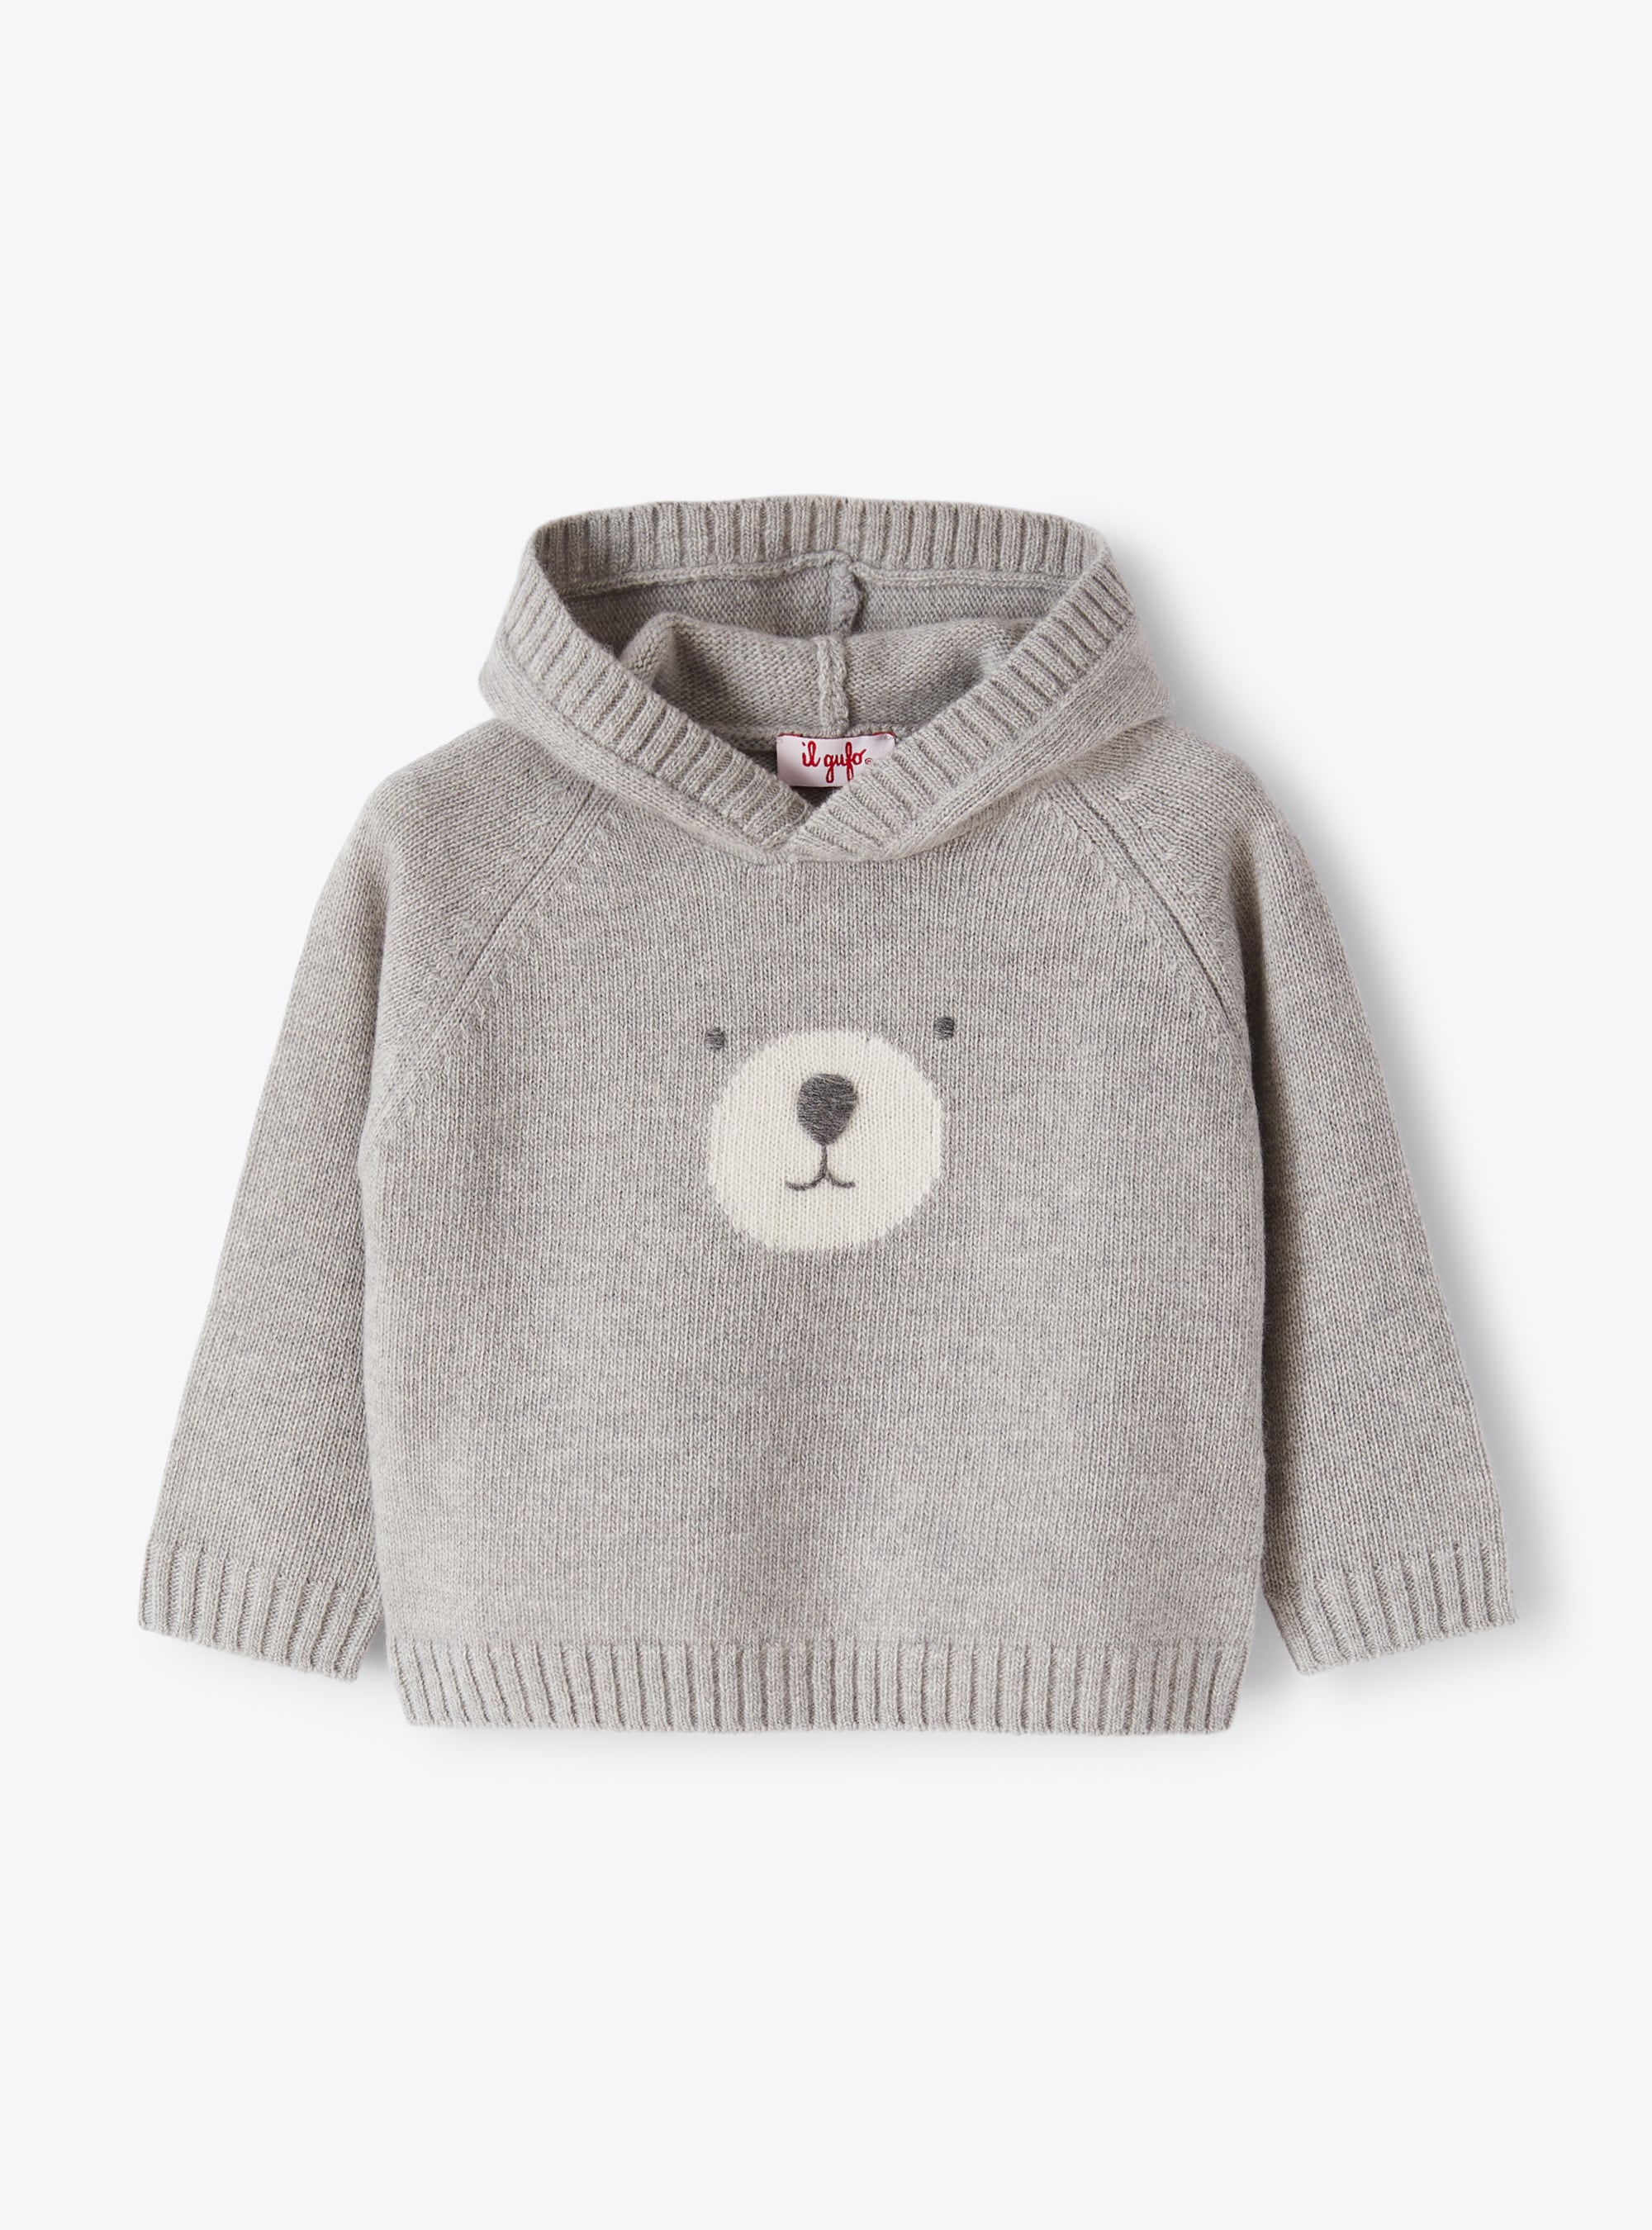 Bear face hooded sweater - Sweaters - Il Gufo